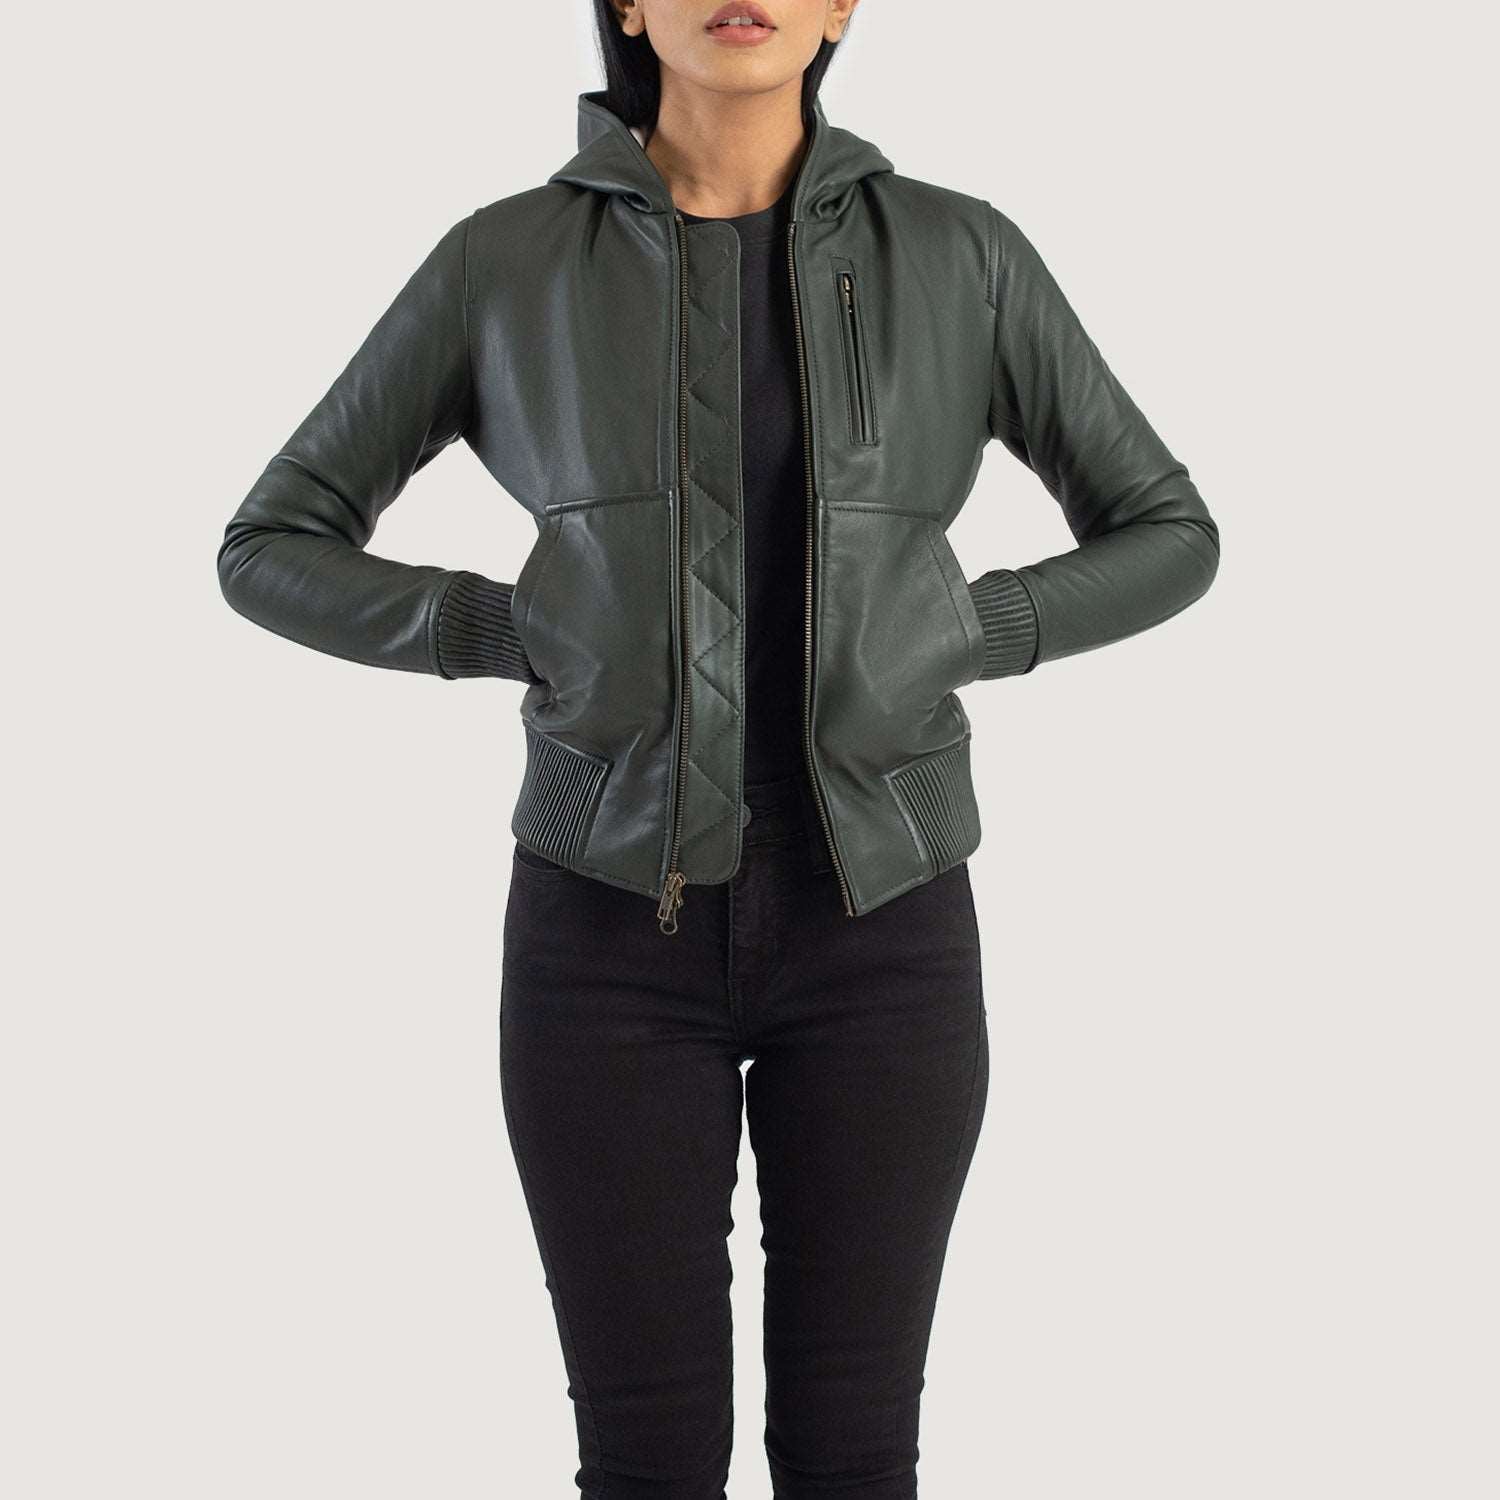 Womens A1 Green Hooded Leather Bomber Jacket - Hooded Jacket Leather Jacket Biker Jacket Womens Bomber Jacket Women's A1 Green Hooded Leather Bomber Jacket, Hooded Women's Leather Bomber Jacket, Stylish Women's Green Bomber Jacket, Premium Quality Leather Jacket for Women, Durable Green Leather Jacket for Women, Fashionable Hooded Bomber Jacket for Women, High-Quality Women's Leather Outerwear, Trendy Women's Leather Bomber Jacket, Green Leather Jacket with Hood, Women's Fashion Leather Jacket